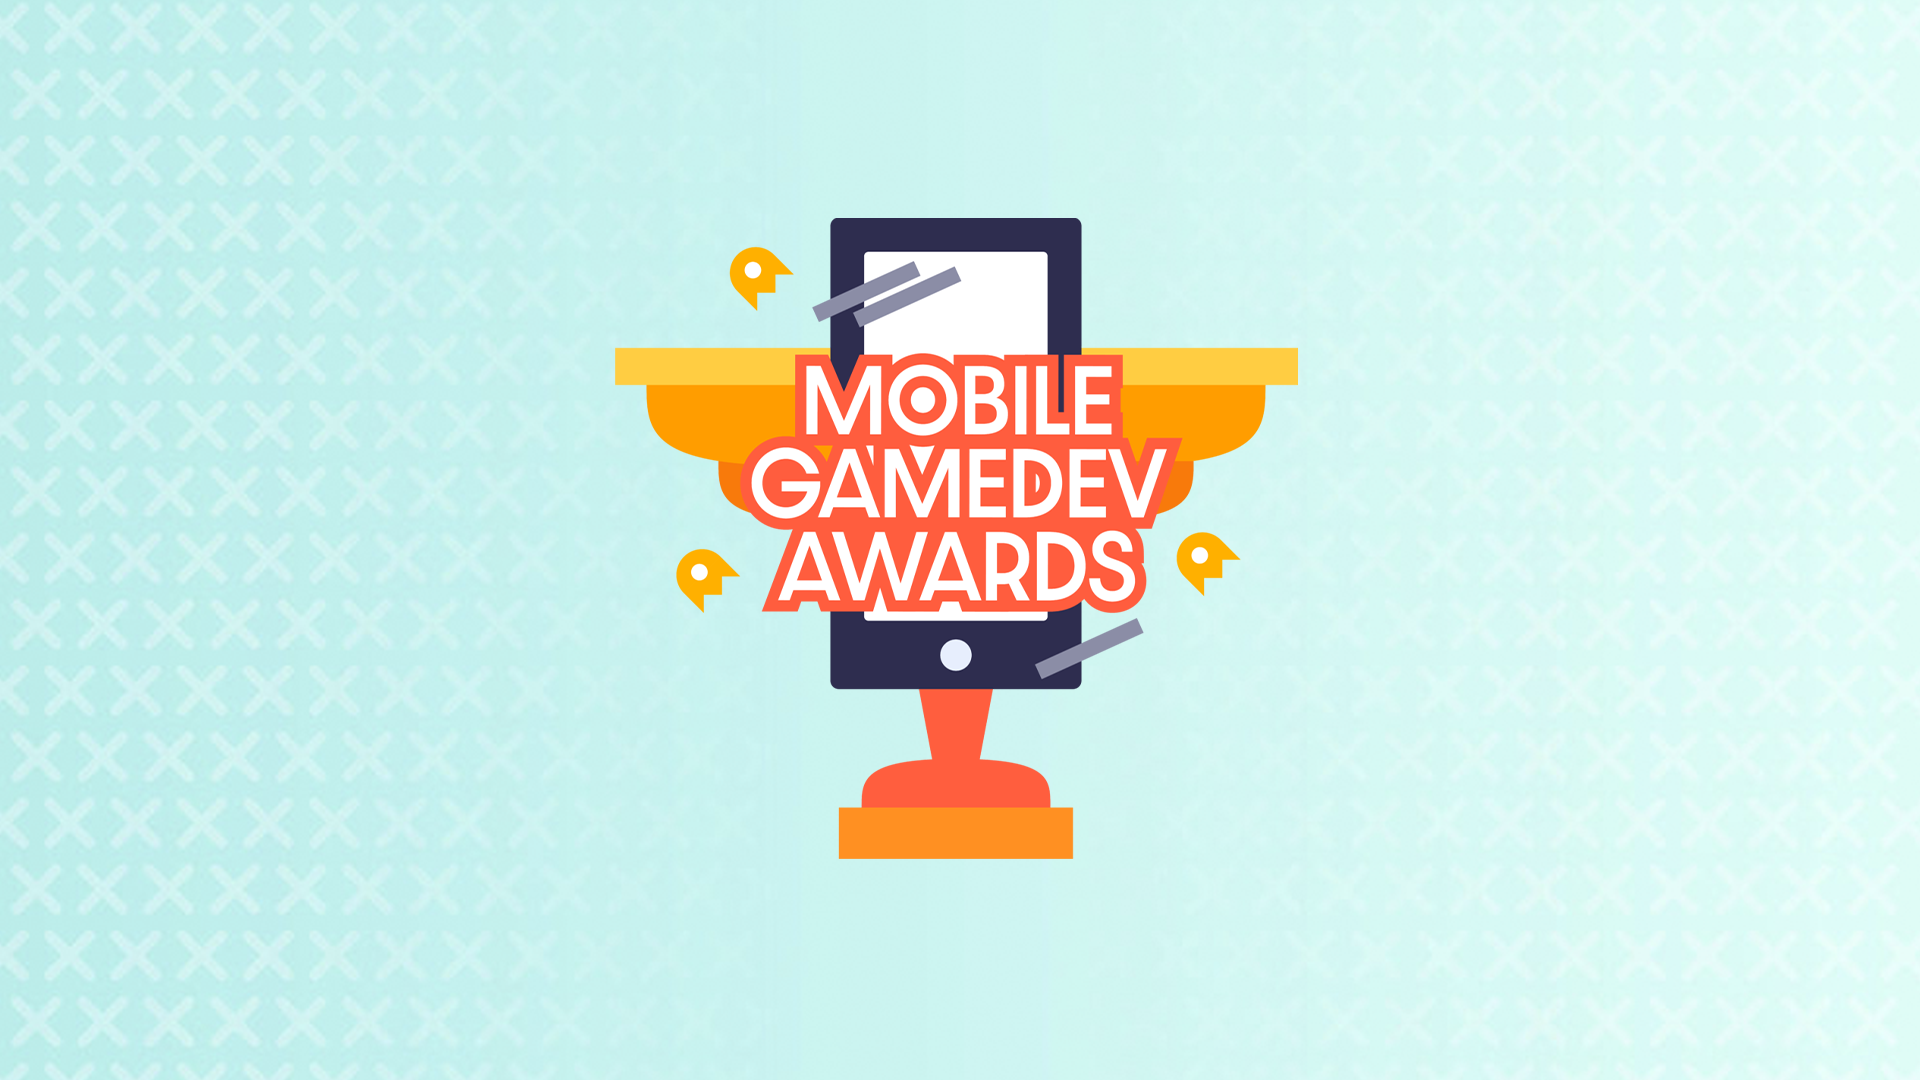 Scopely wins BEST PUBLISHER at the Mobile Games Awards